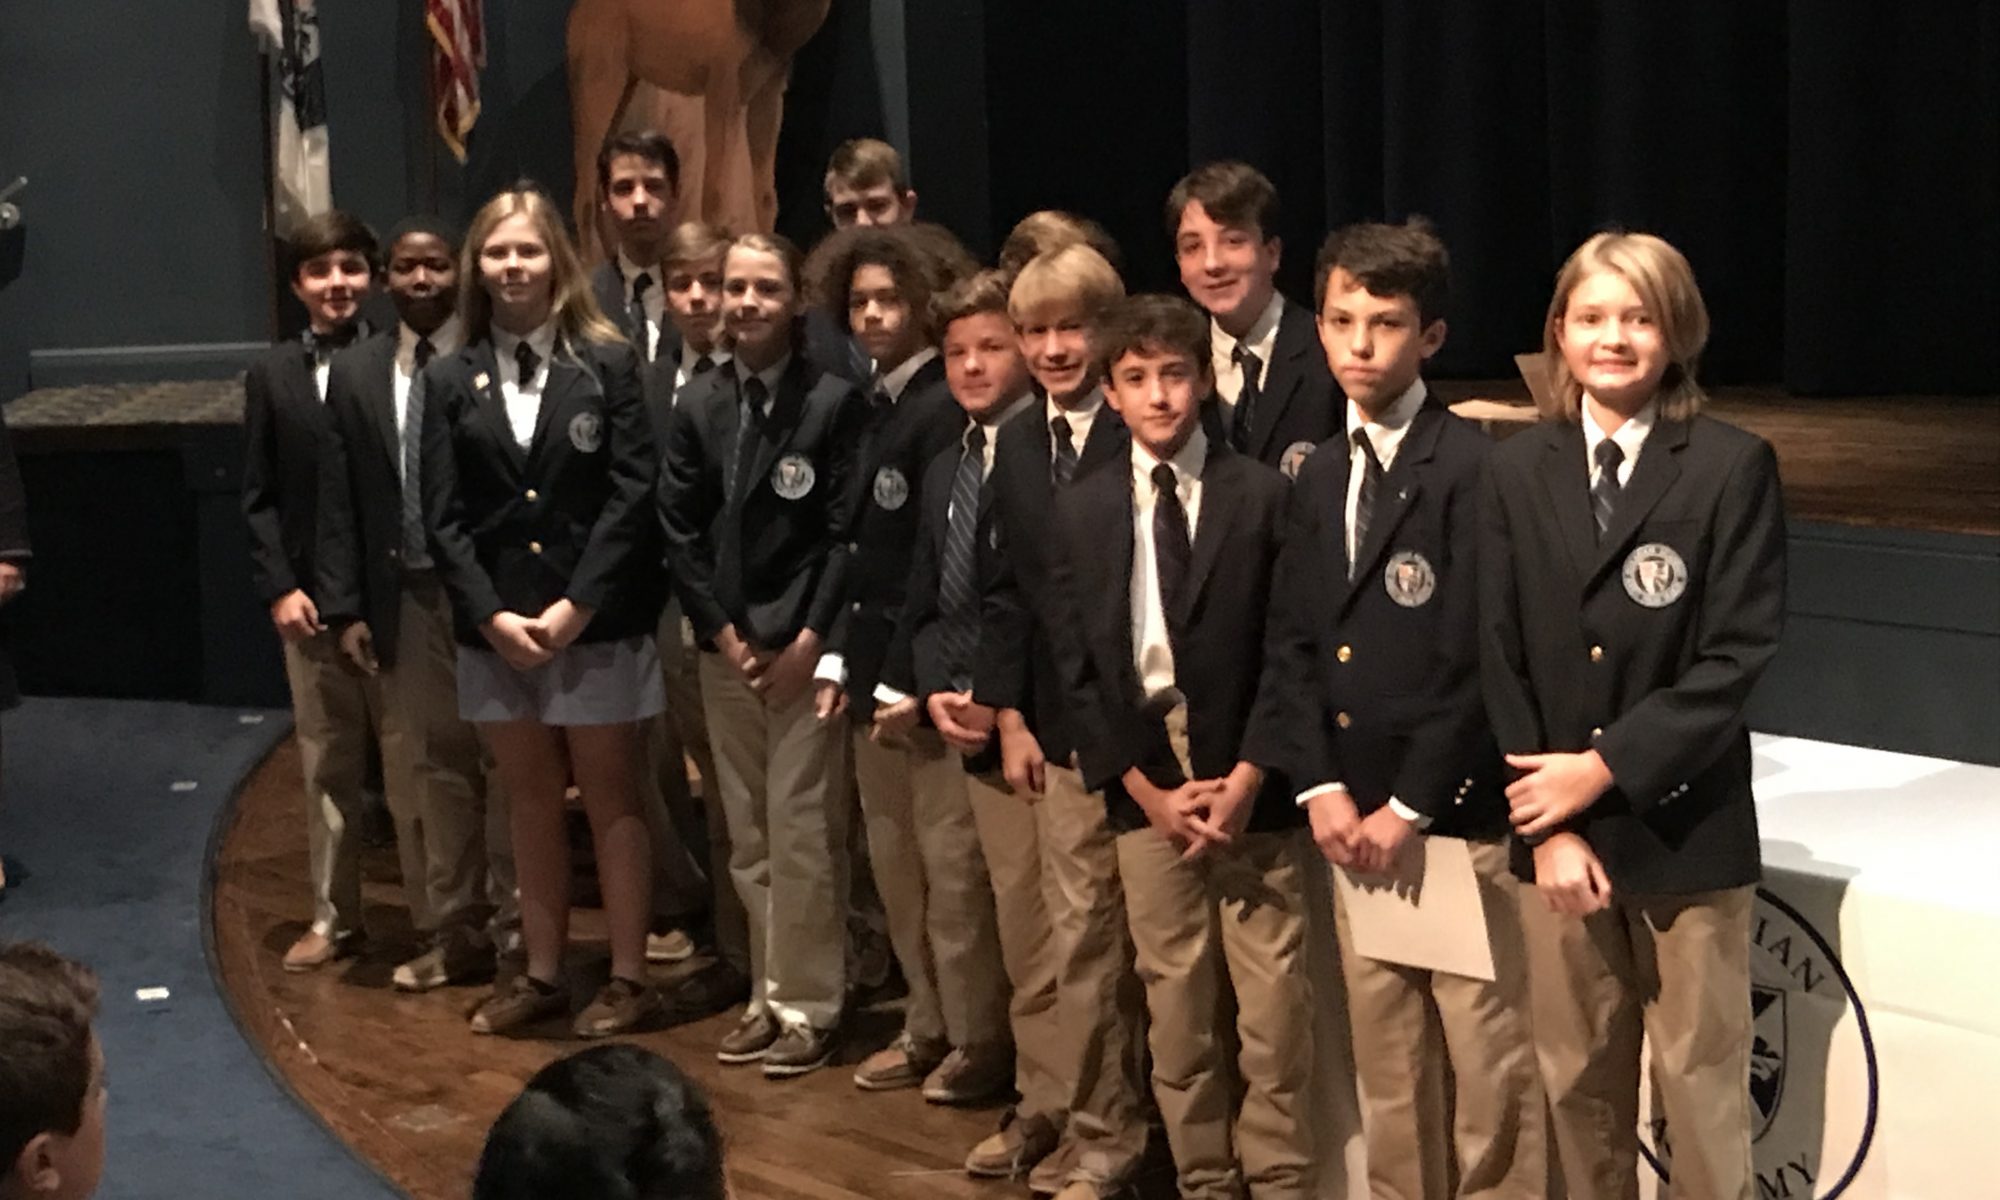 Honoring 1st Trimester Academic and Athletic Achievers at Rosarian Academy in 2019